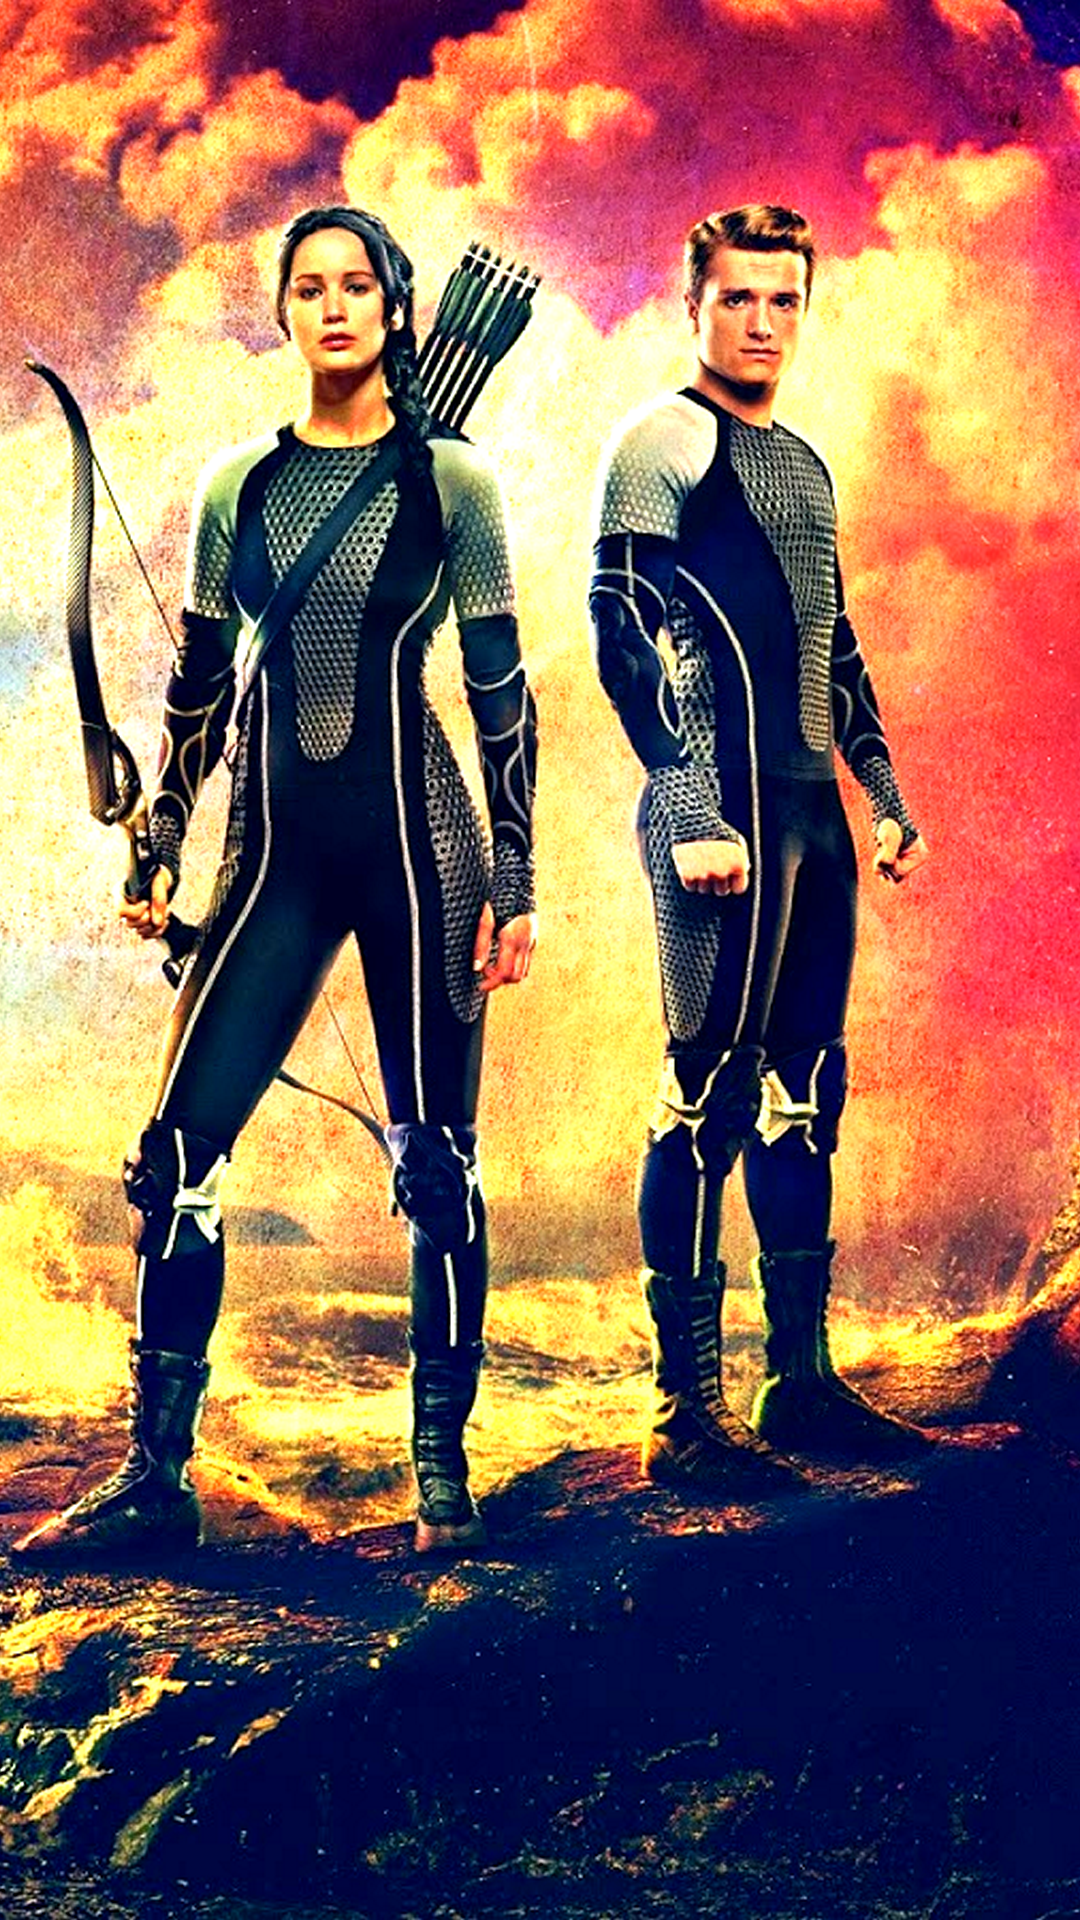 The Hunger Games - Catching Fire, Entertainment Backgrounds, wallpapers for Samsung Galaxy S4, fondos galaxy s4, fondos de pantalla galaxy s4, sfondi samsung galaxy s4, hintergrund HD 1080x1920, Catching Fire